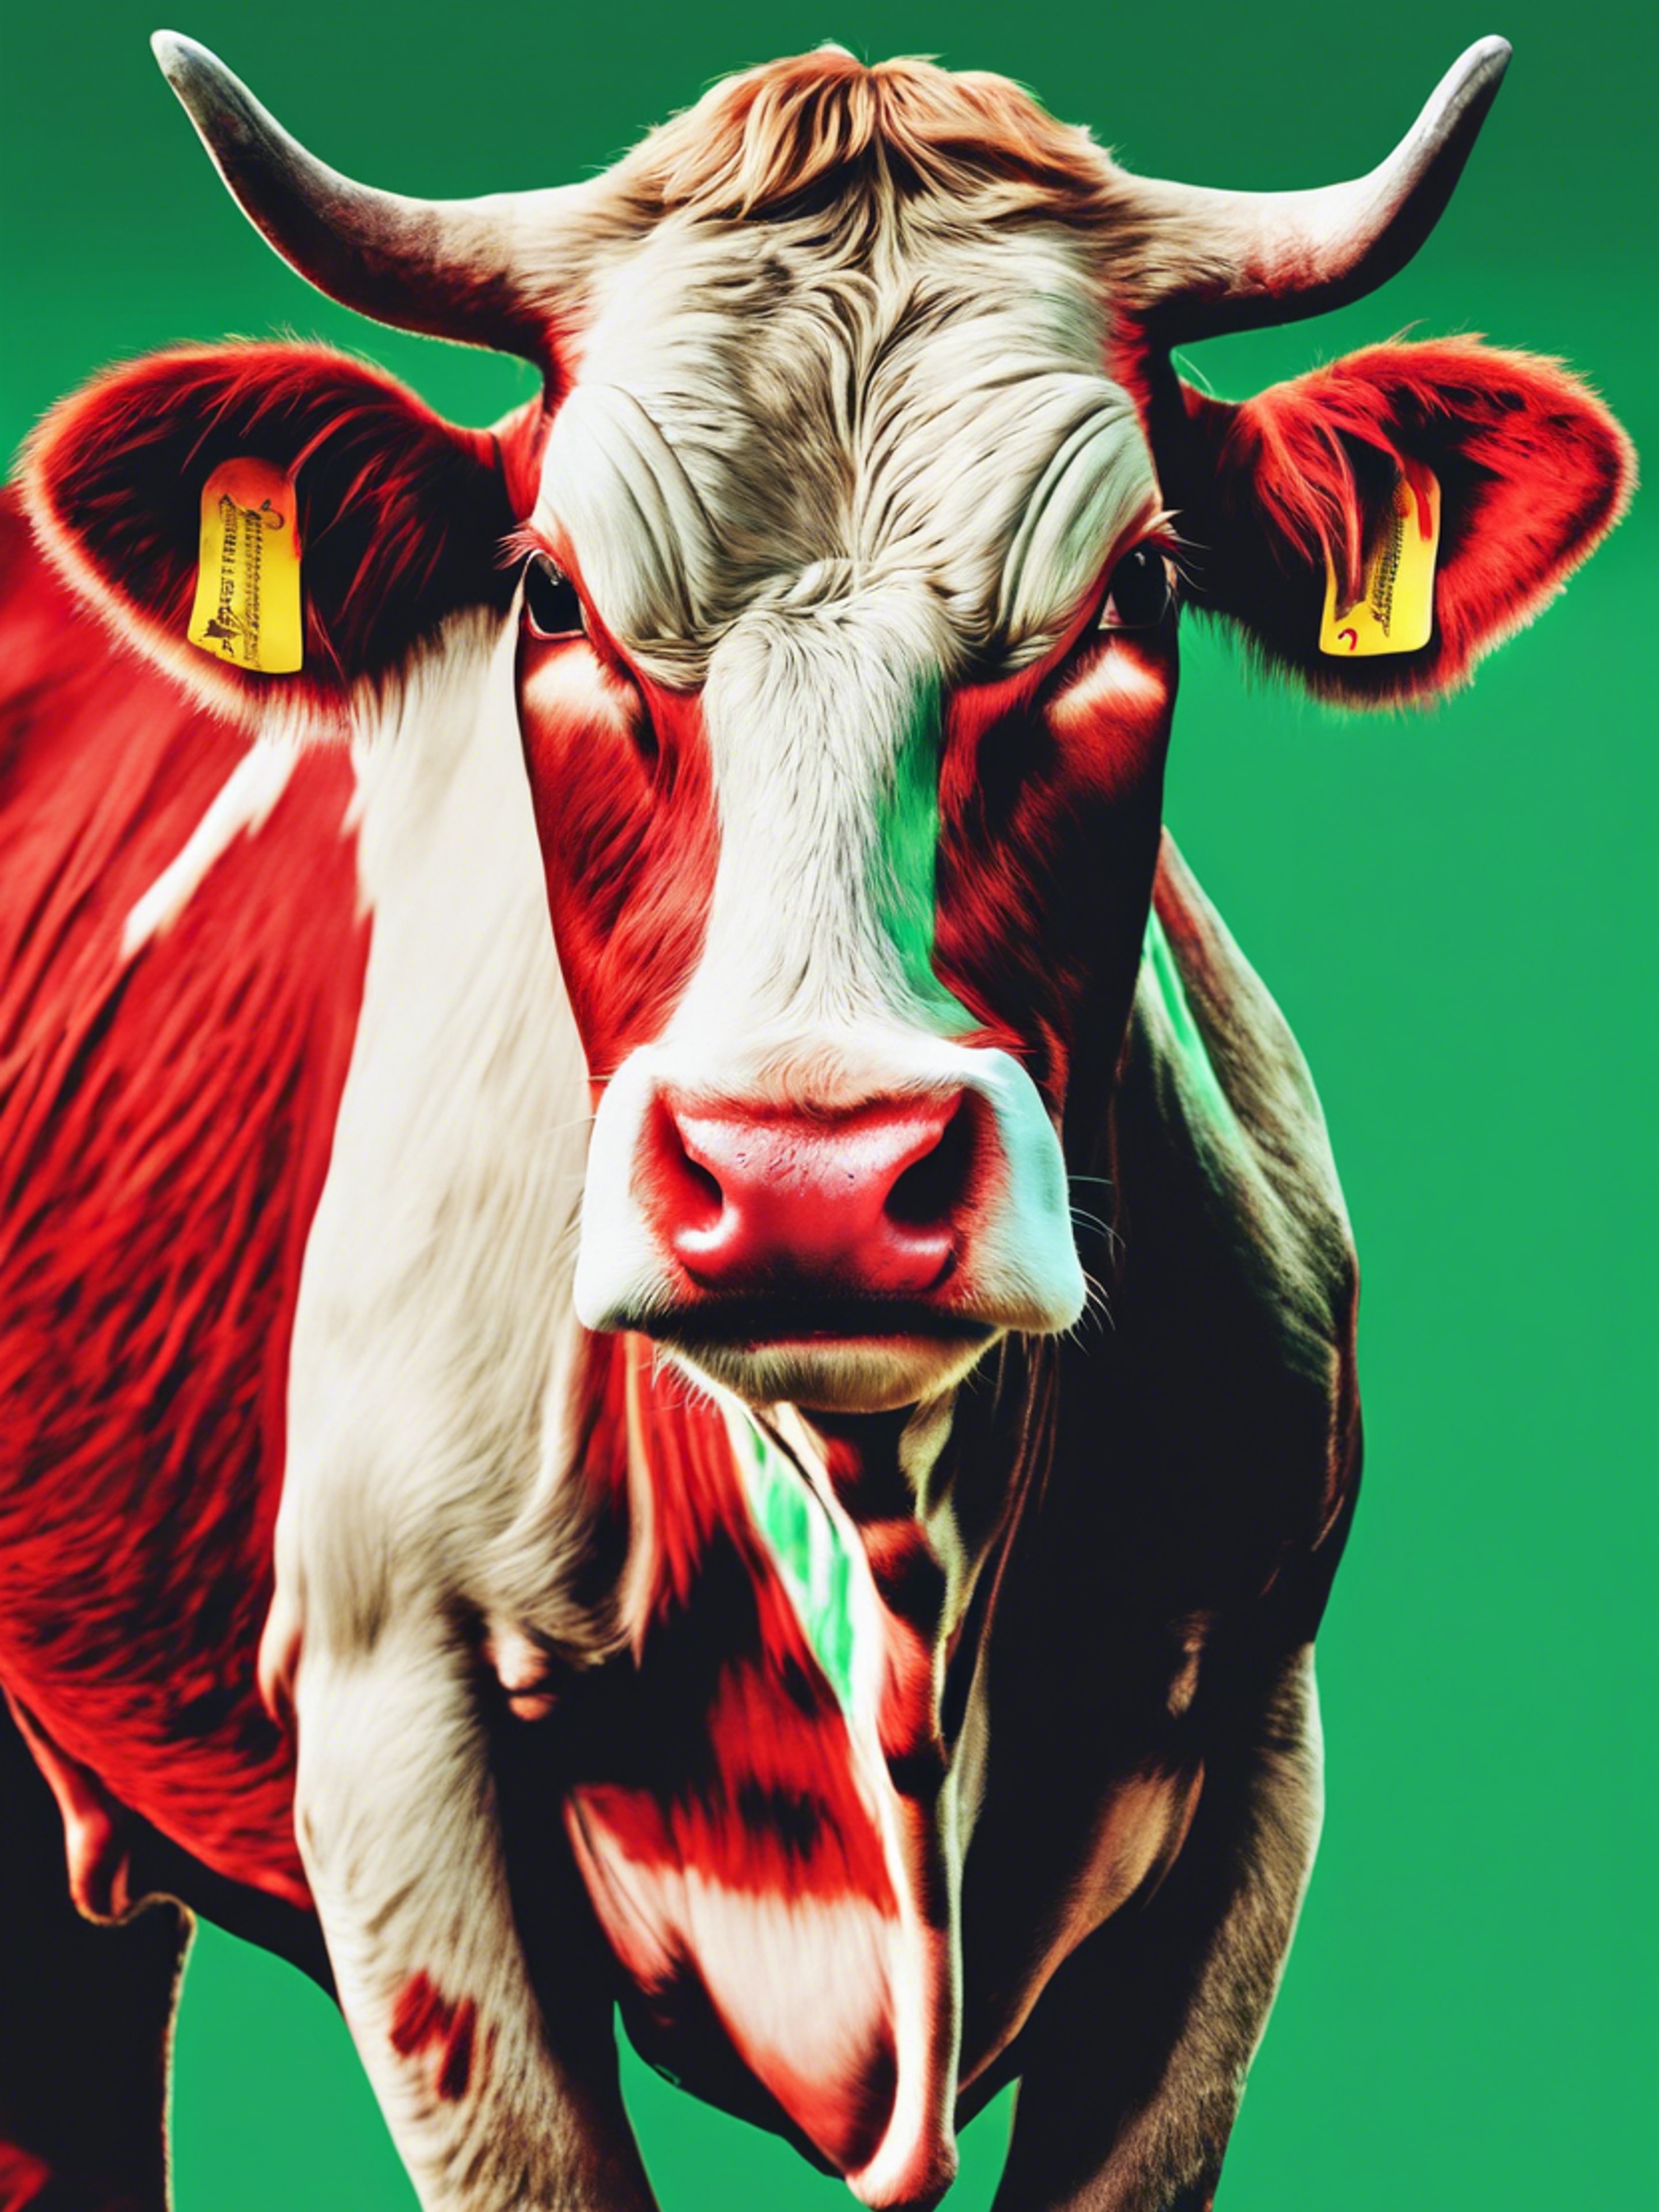 Pop-art style cow print in a palette of red and green. Tapéta[5b65906f2b9649418c8c]